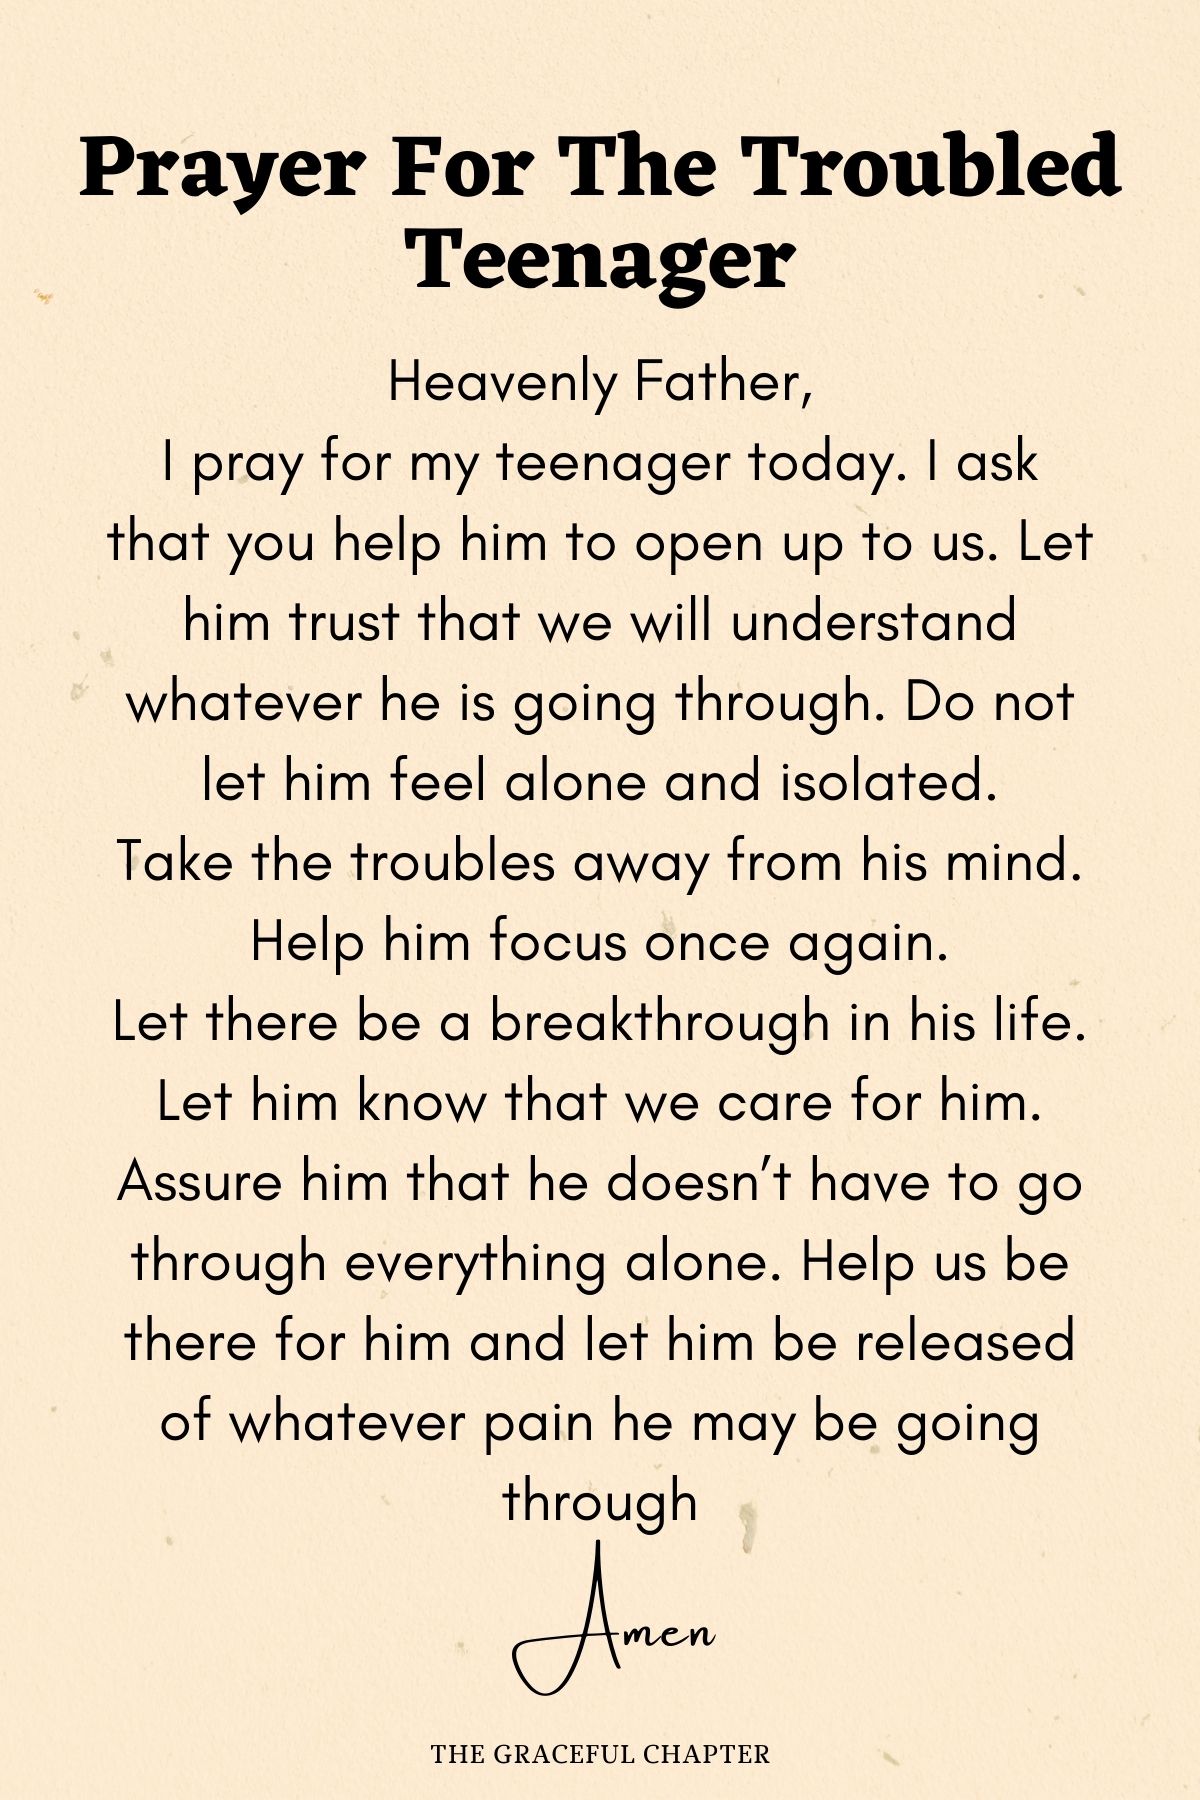 Prayer for the troubled teenager